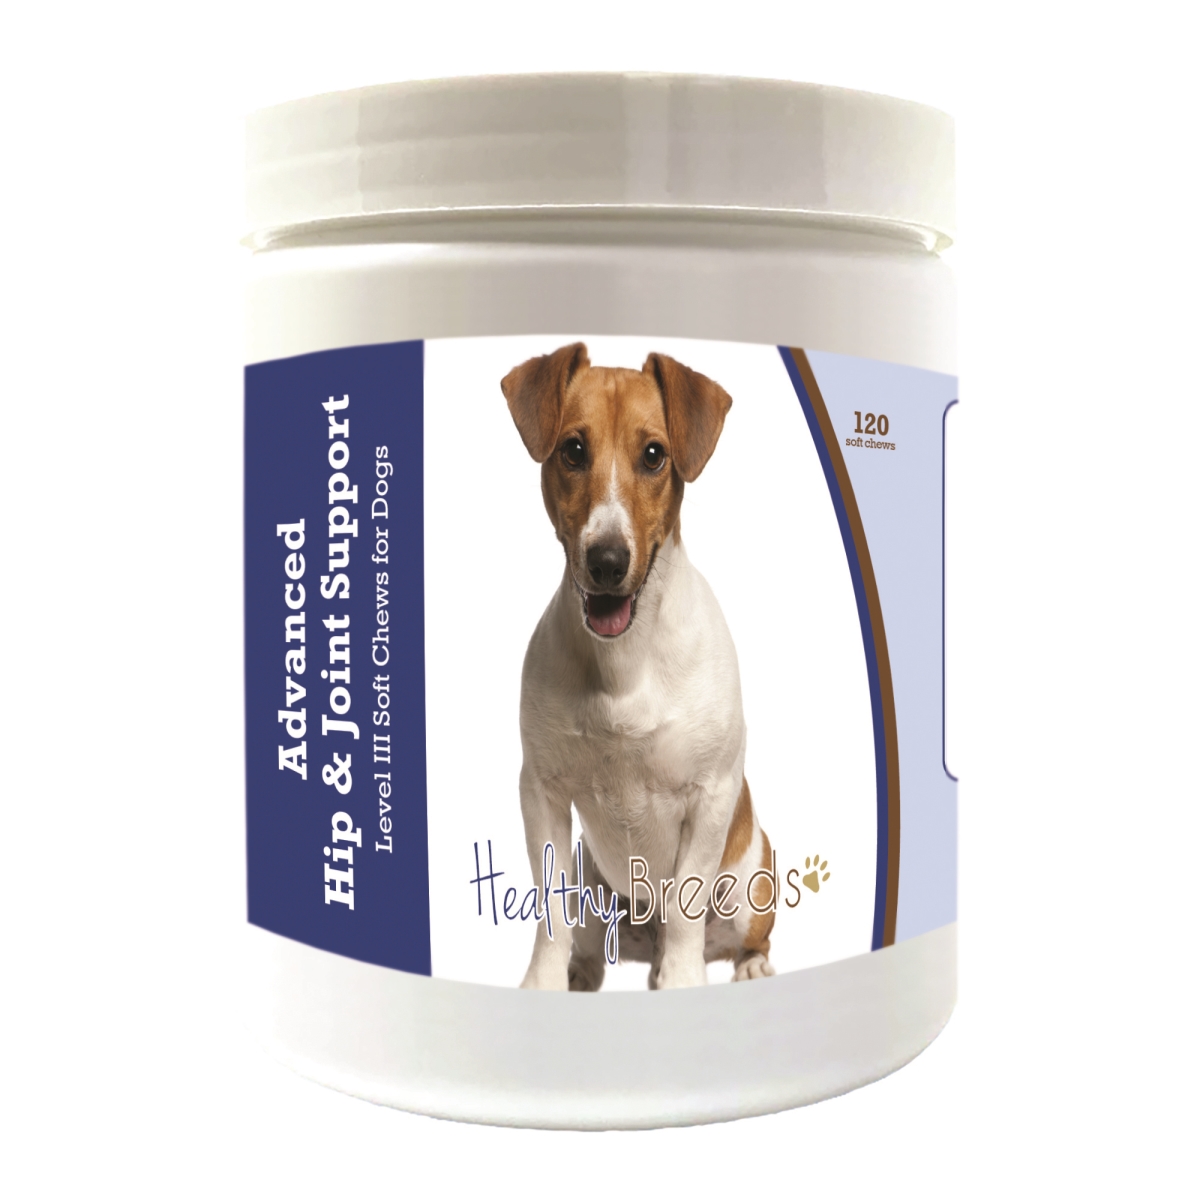 Picture of Healthy Breeds 192959898484 Jack Russell Terrier Advanced Hip & Joint Support Level III Soft Chews for Dogs